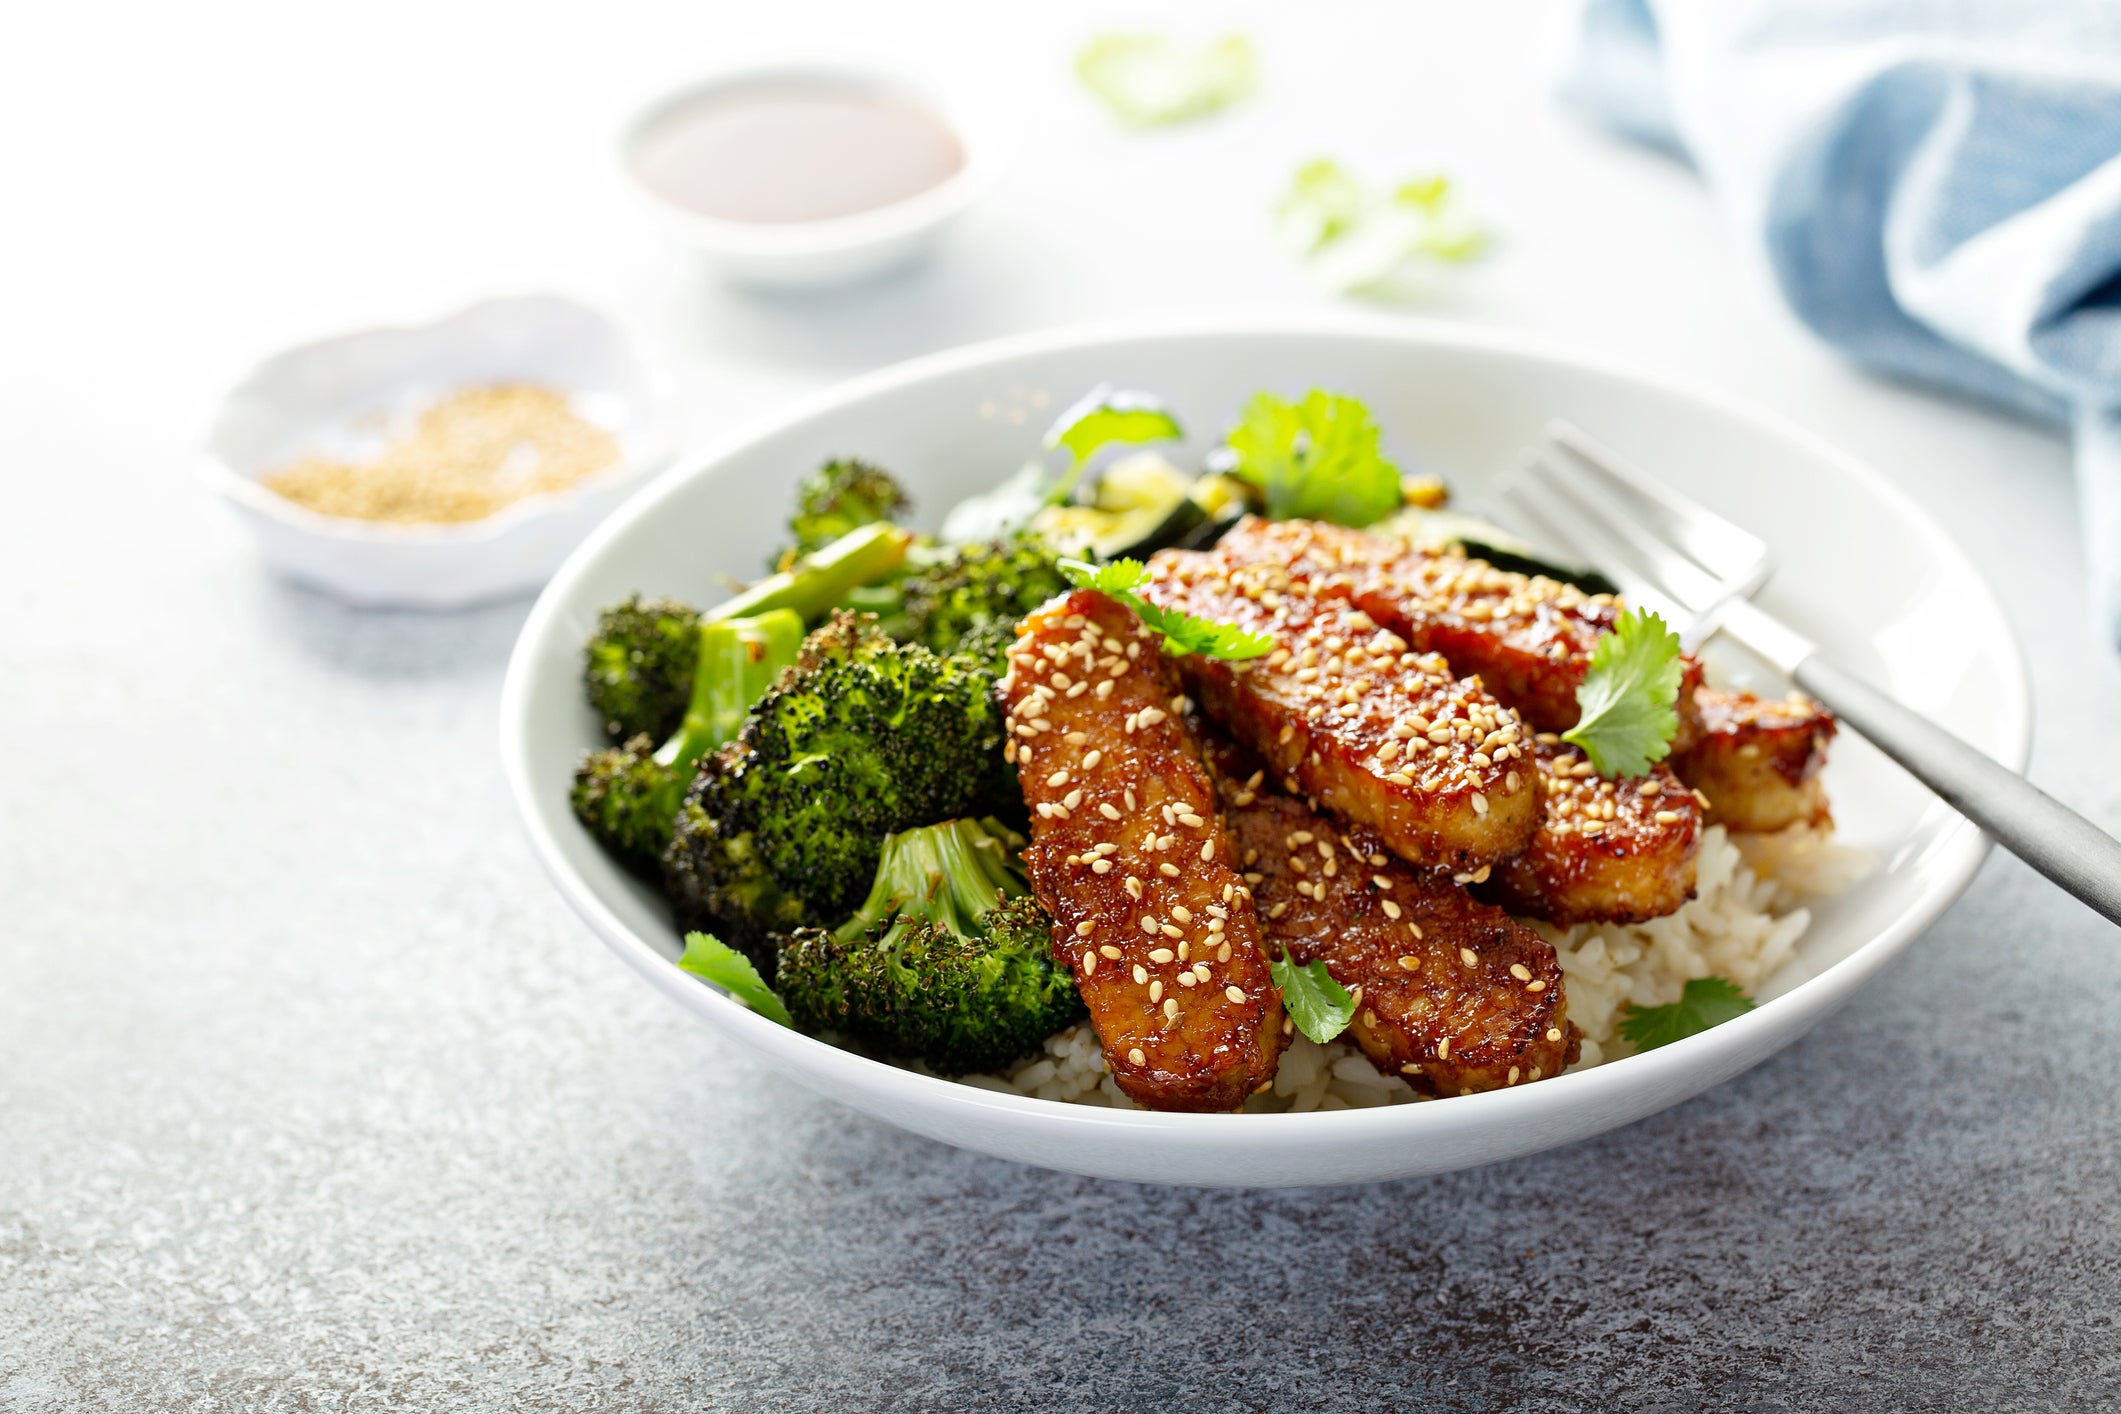 Try swapping meat for plant-based alternatives like tempeh